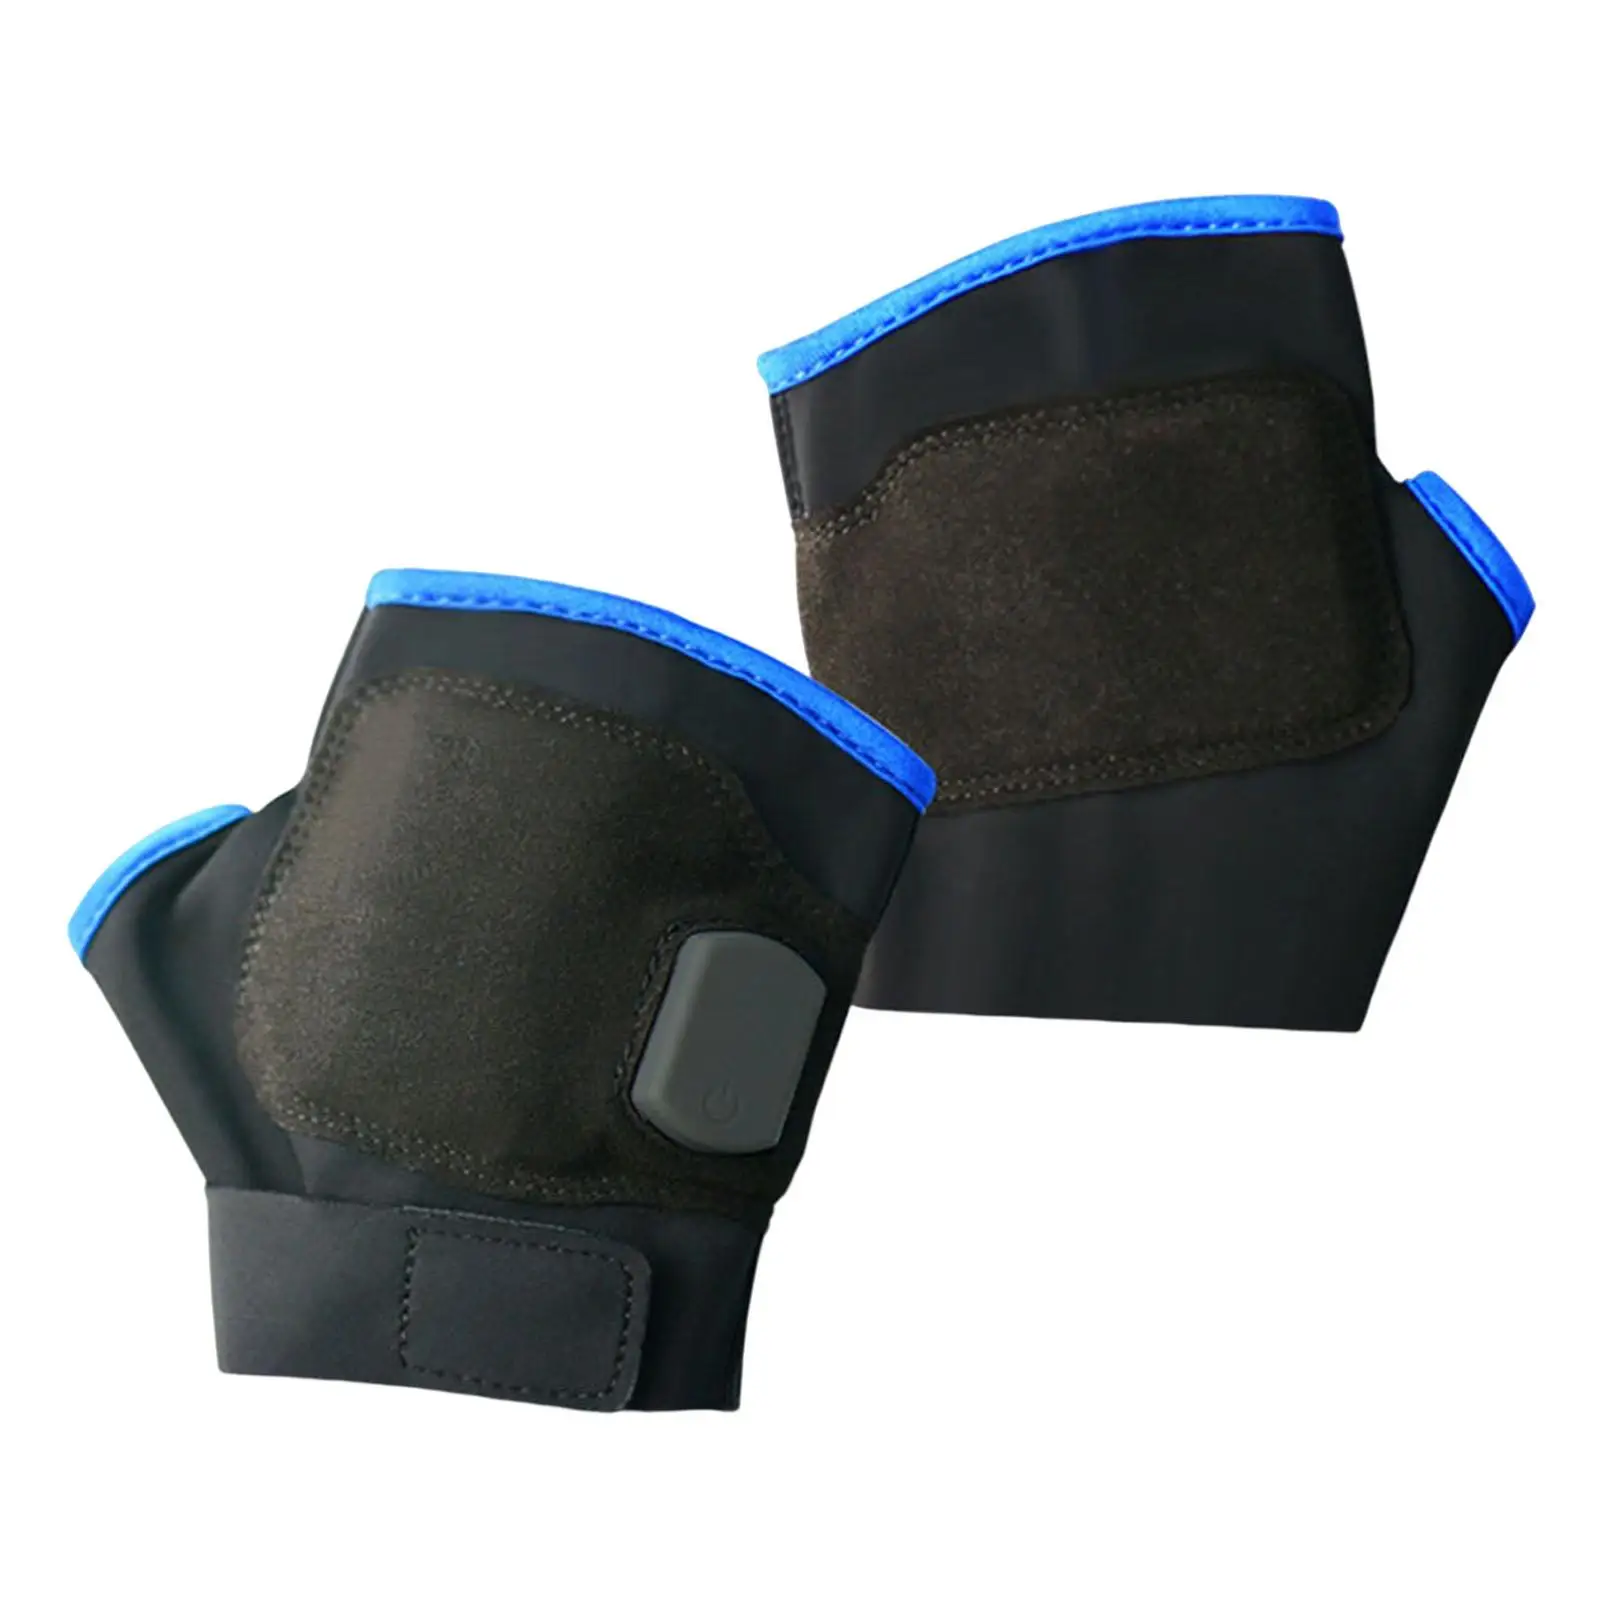 USB Heated Gloves with 3 Temperature Levels Mitten for Gaming